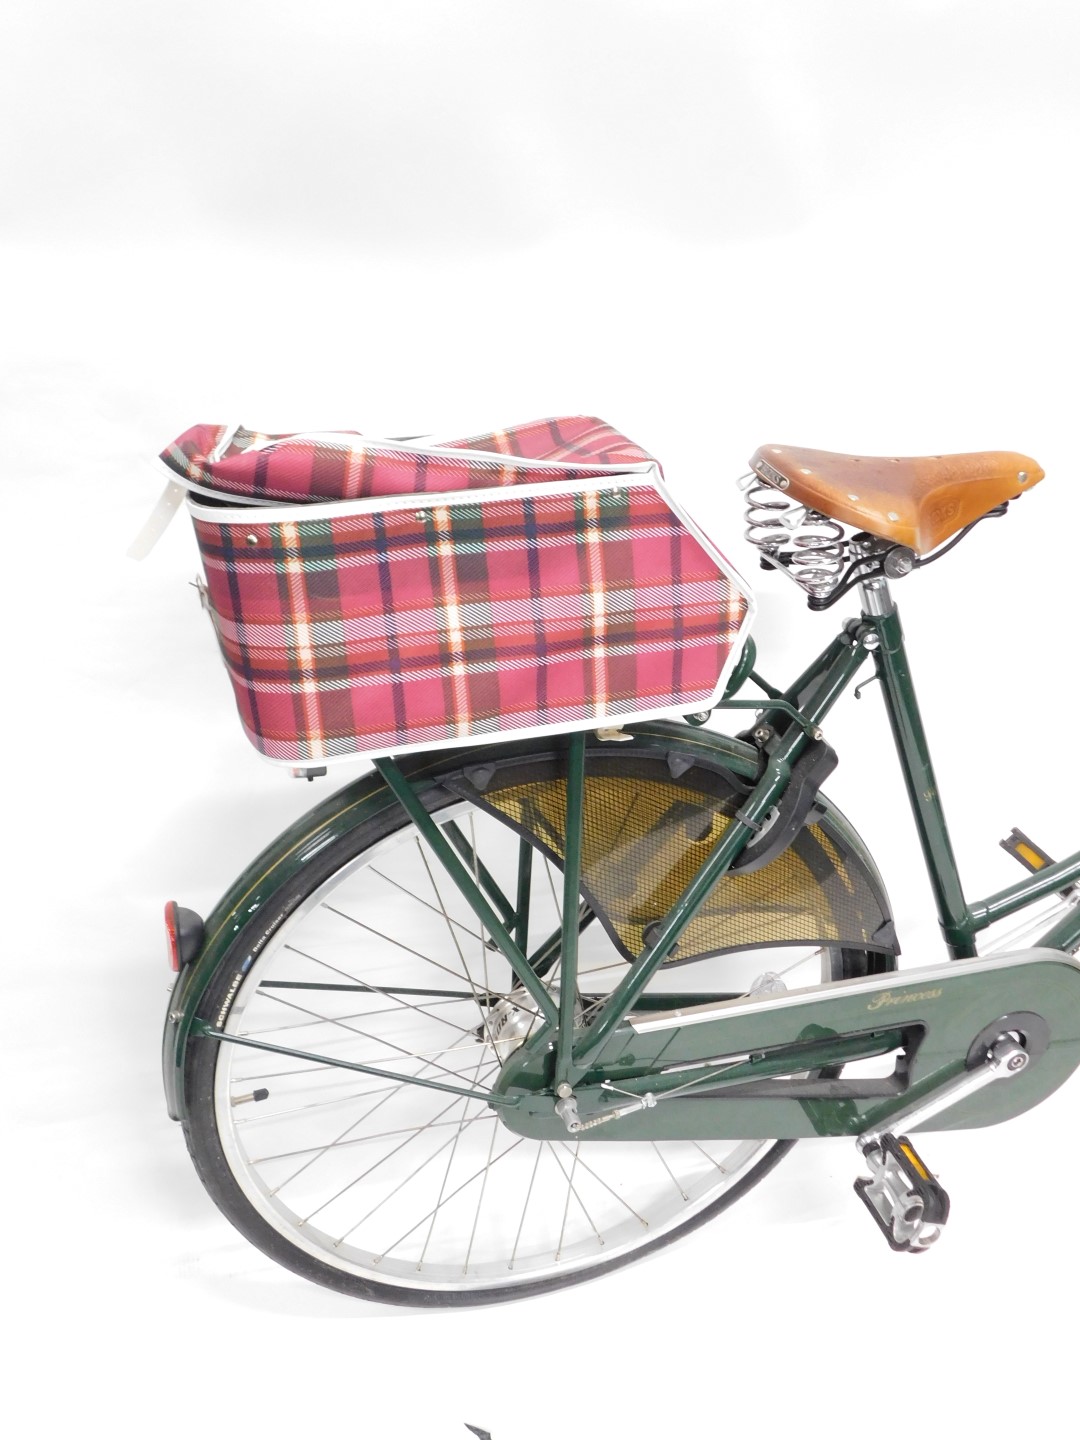 A Pashley British racing green ladies bicycle, with brook sadle and a chequered box to rear. - Image 4 of 5